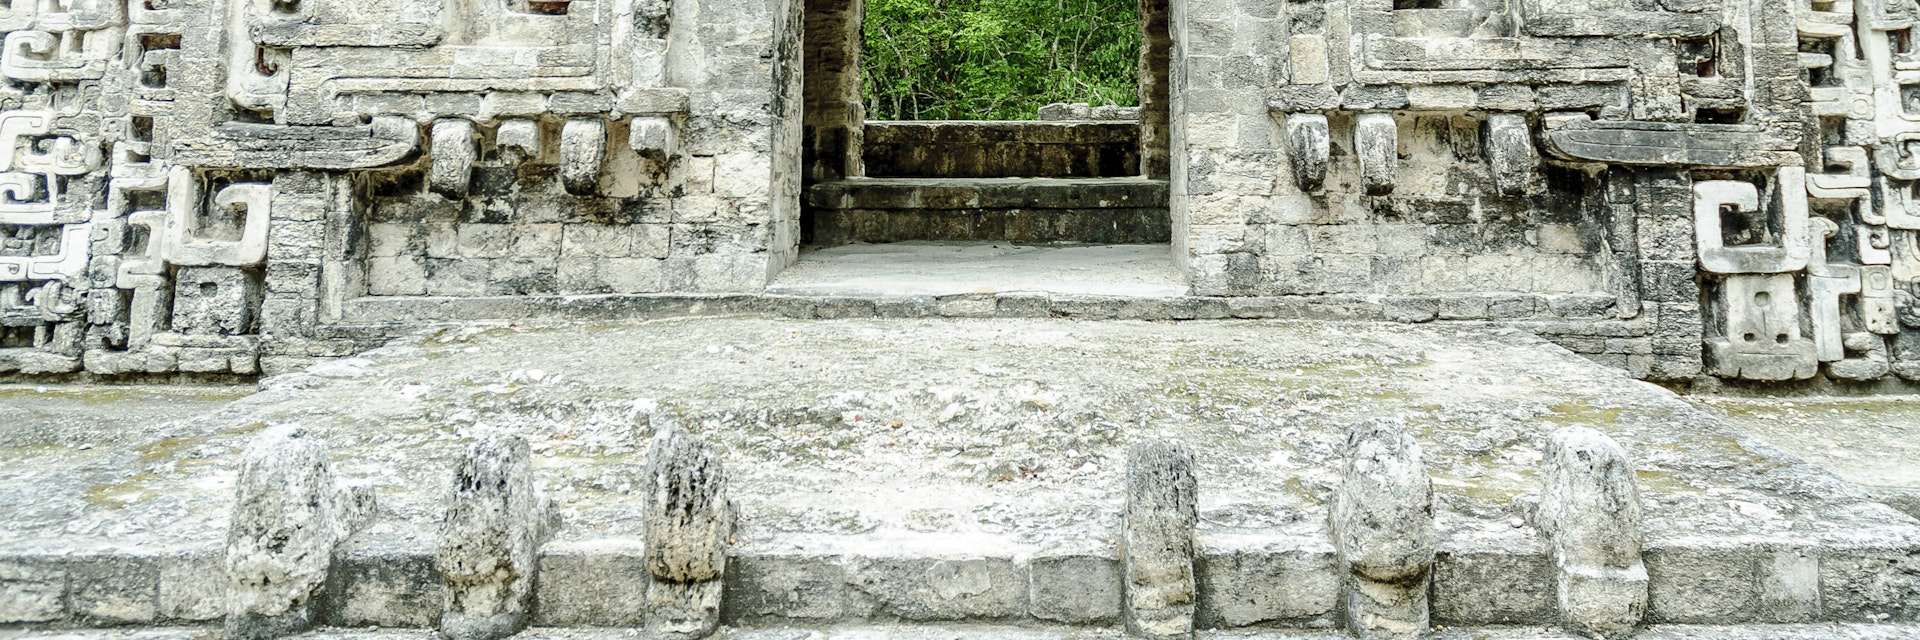 A square entrance to Chicanná (which means House of the Serpent Mouth).